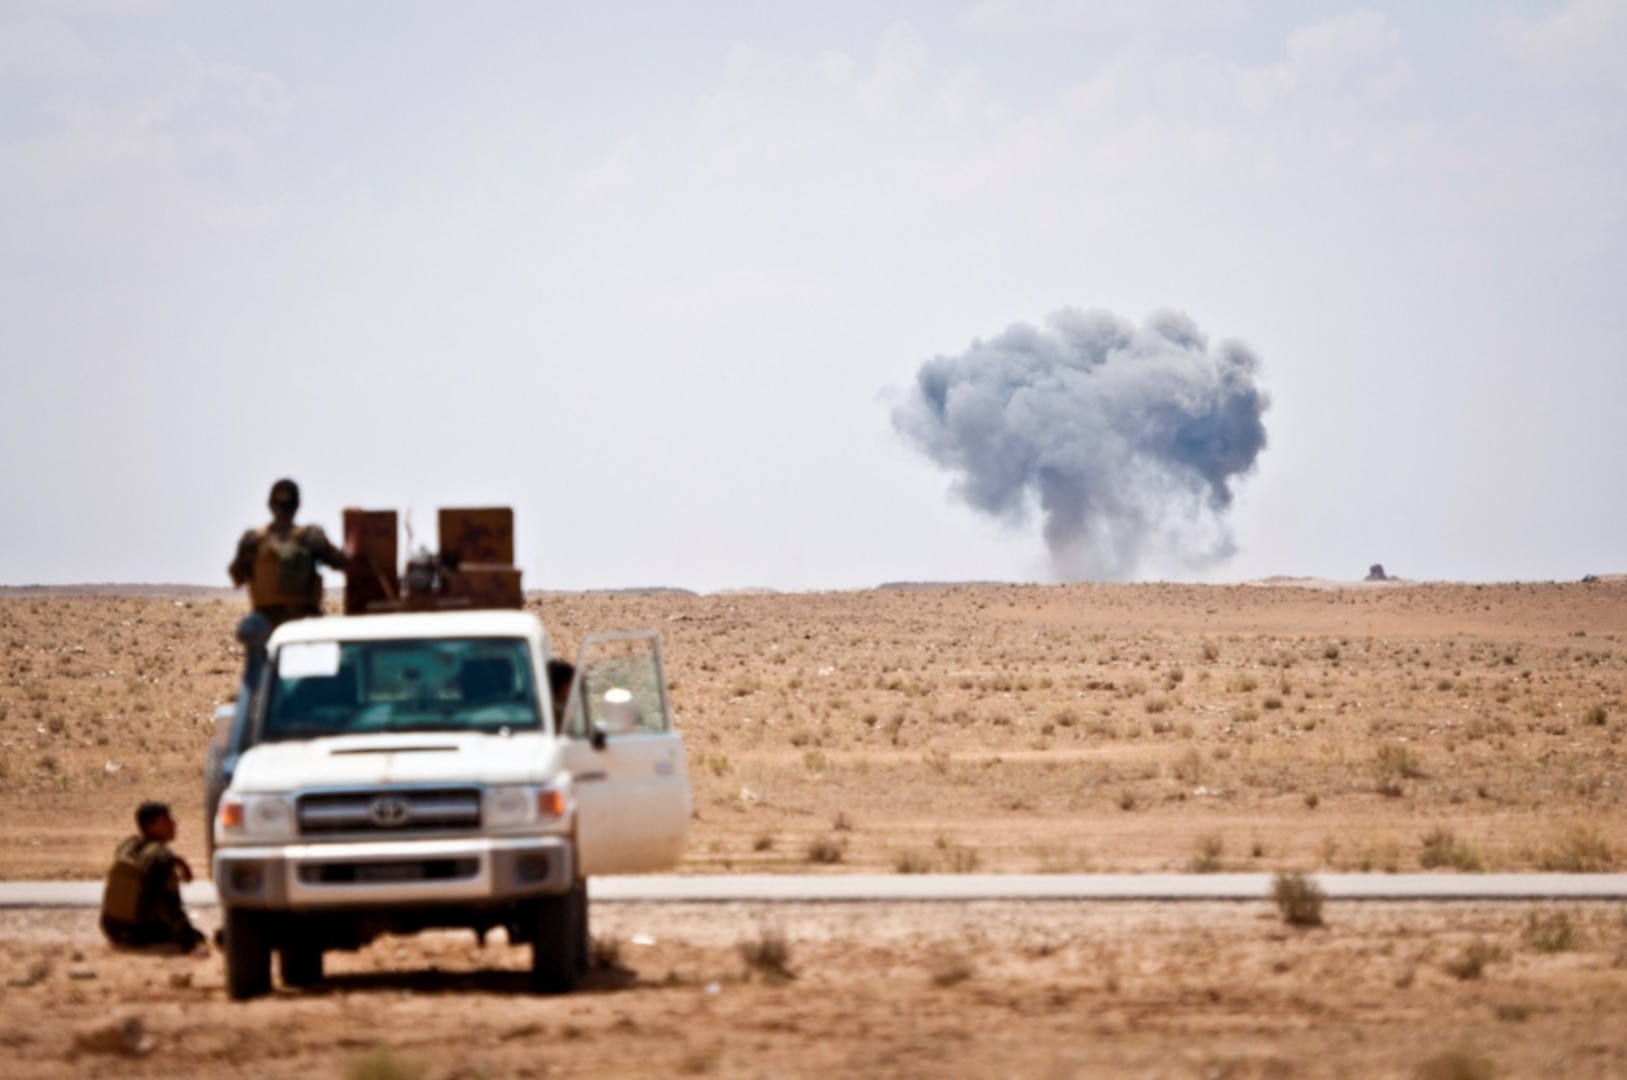 Syrian Democratic Forces watch as a coalition airstrike hits its target on a known Islamic State of Iraq and Syria location near the Iraq-Syria border.